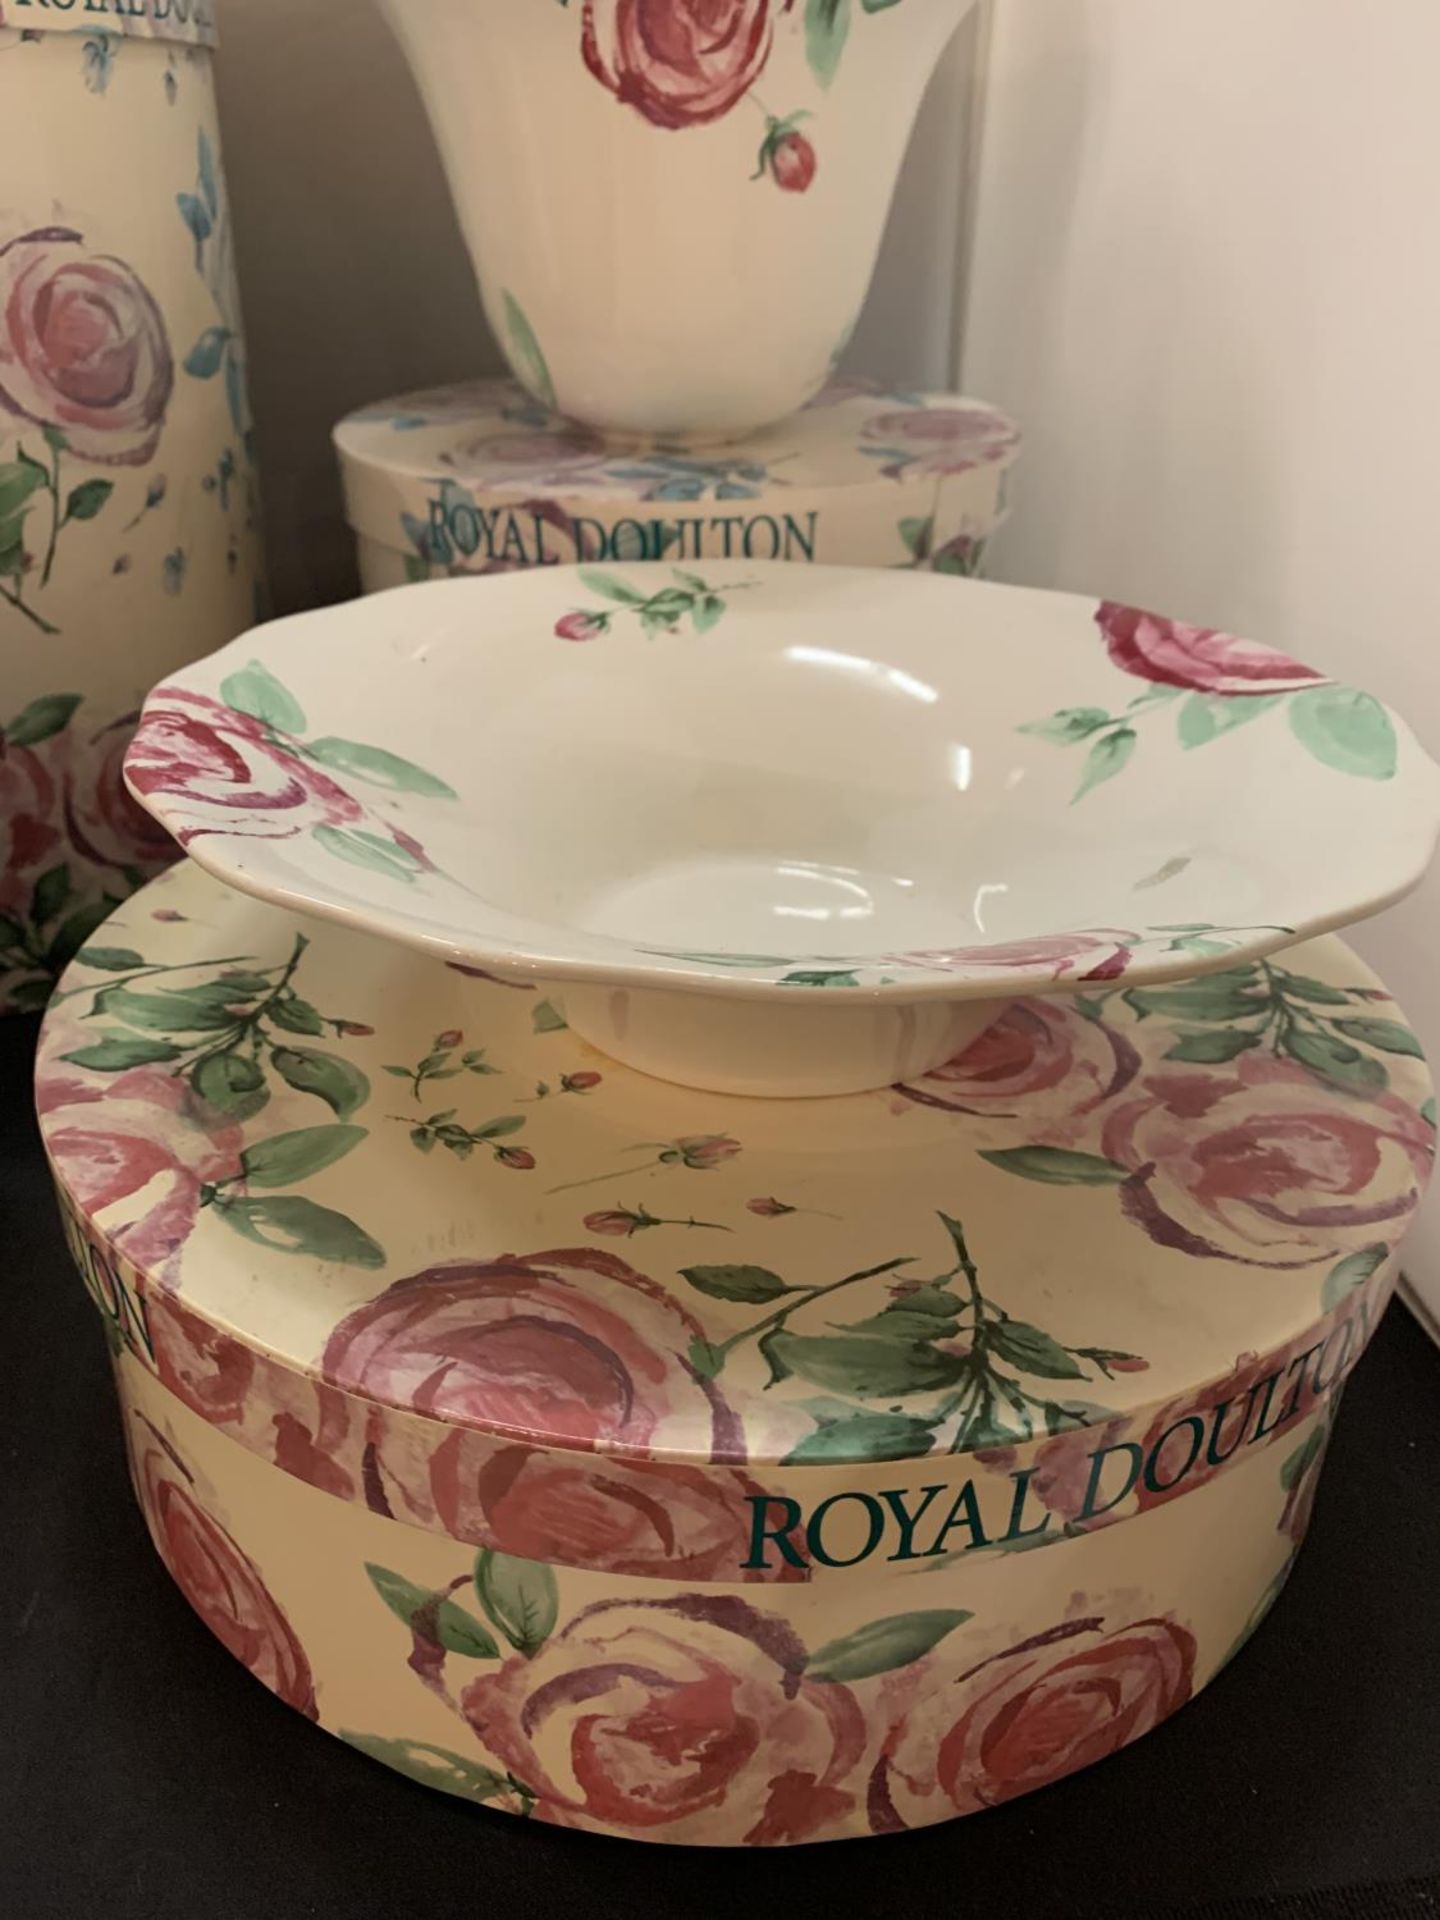 THREE VARIOUS ROYAL DOULTON ROSE CLOUDS ITEMS WITH PRESENTATION BOXES TO INCLUDE A VASE, PLANTER AND - Image 6 of 10